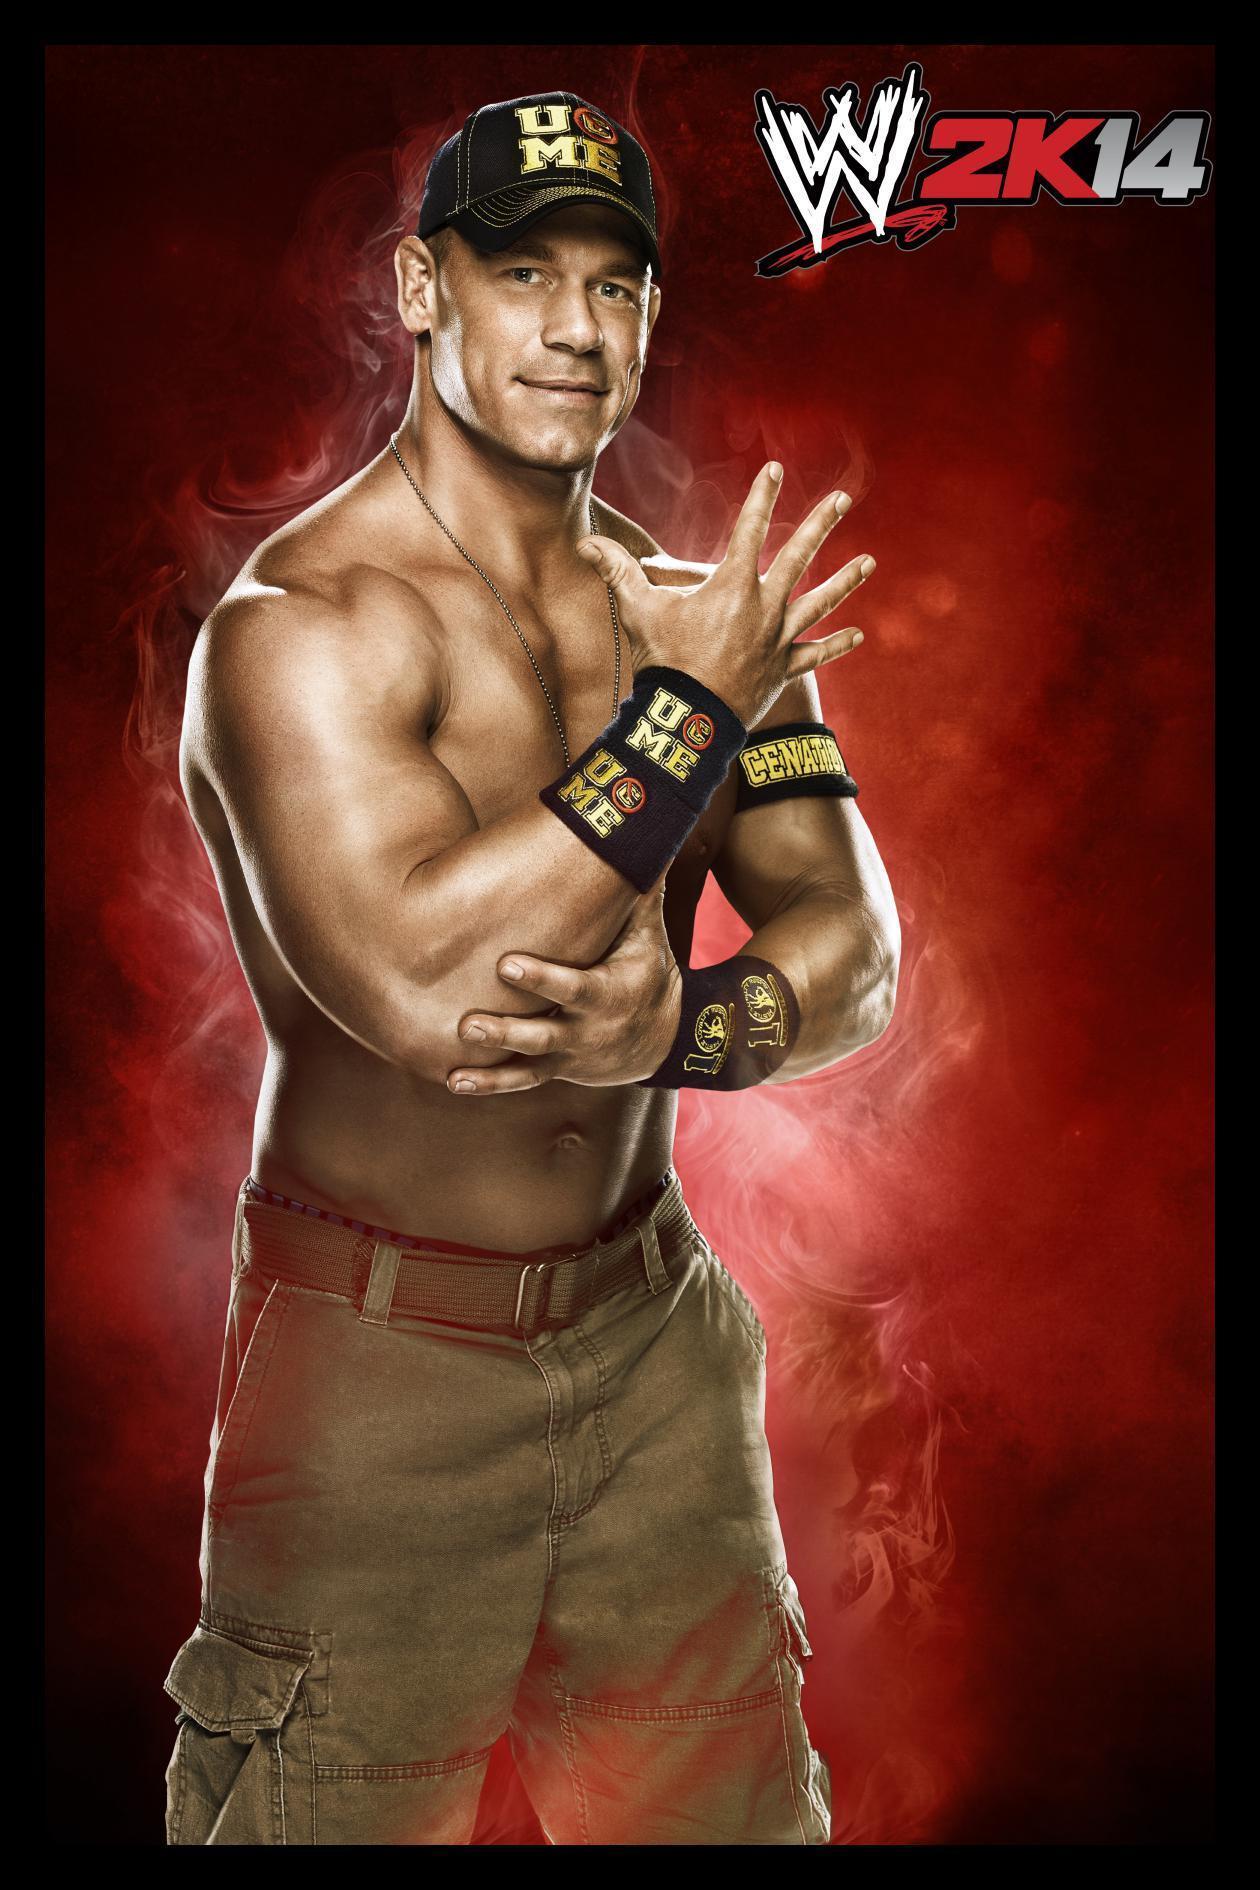 WWE 2K14′s full character roster revealed, get the list & pics